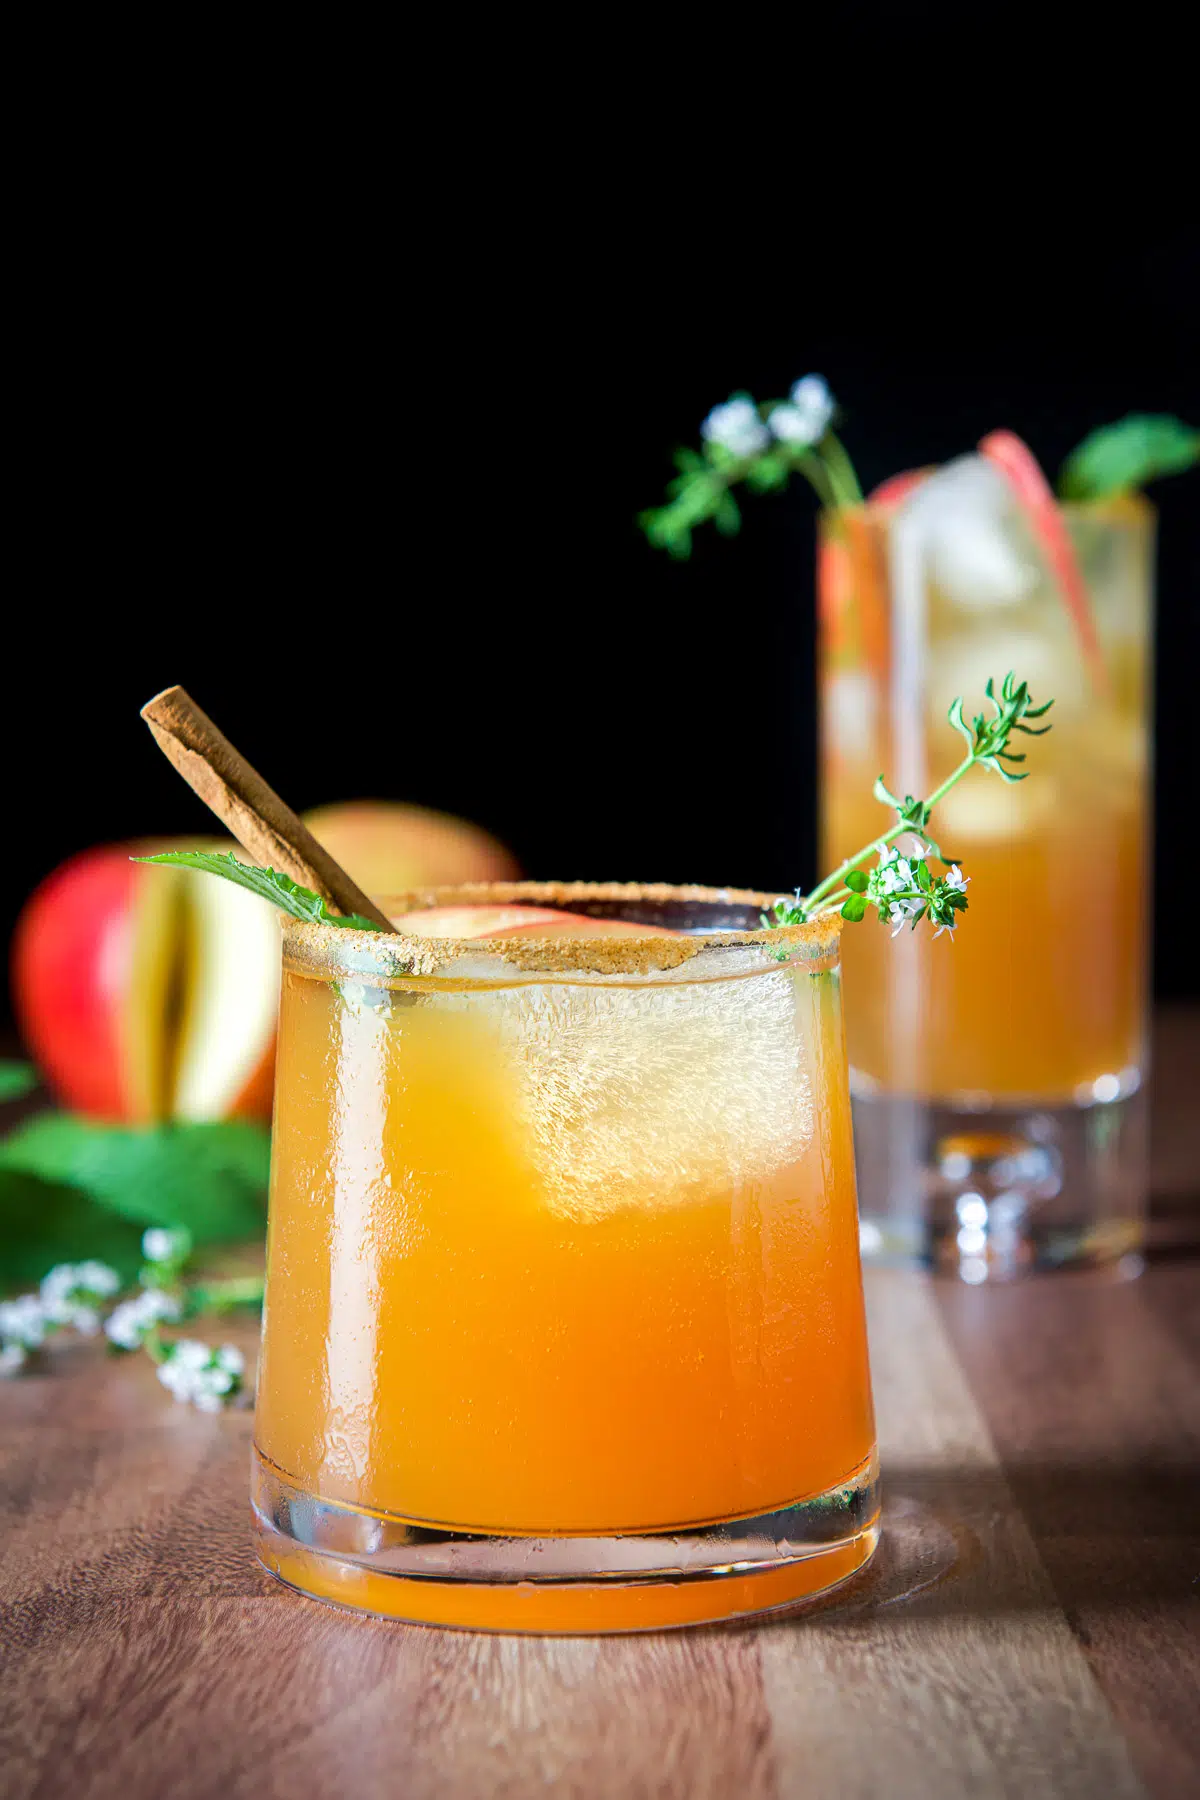 Vertical view of the two glasses filled with the apple spritzer